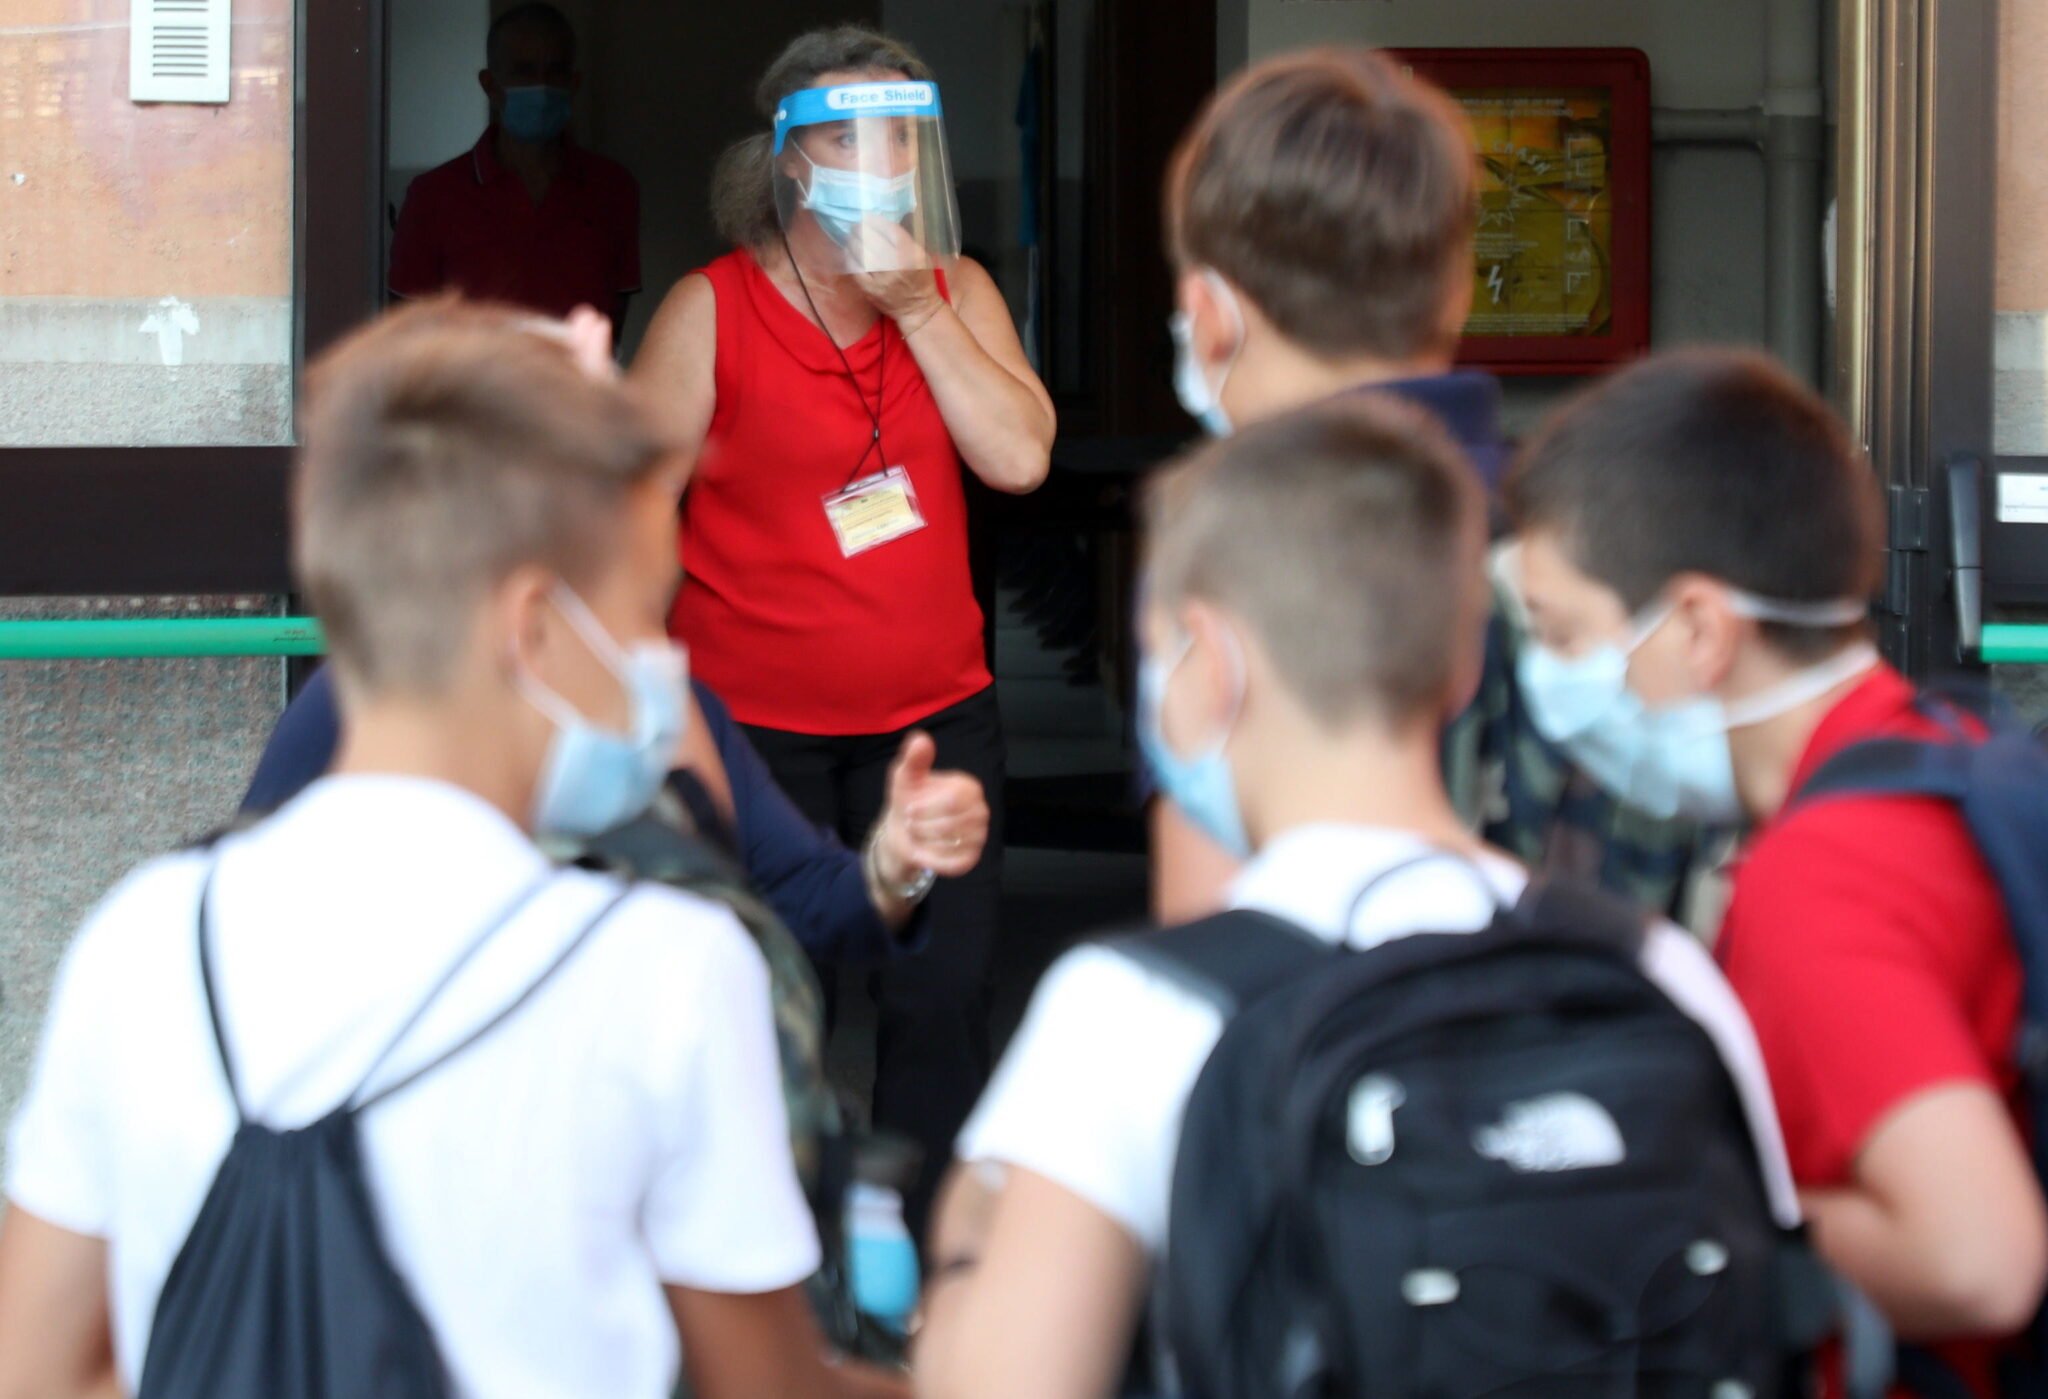 epa08667631 Students are waiting to enter the school in Codogno, Italy, 14 September 2020. Codogno was the first in Italy to be declared 'red zone' due to the Coronavirus Covid19 pandemic. Schools reopened in much of Italy on 14 September for the first time since the early stages of the COVID-19 pandemic in early March. Some 5.6 million pupils are back in class in 12 regions, plus the autonomous province of Trento.  EPA/MATTEO BAZZI 
Dostawca: PAP/EPA.